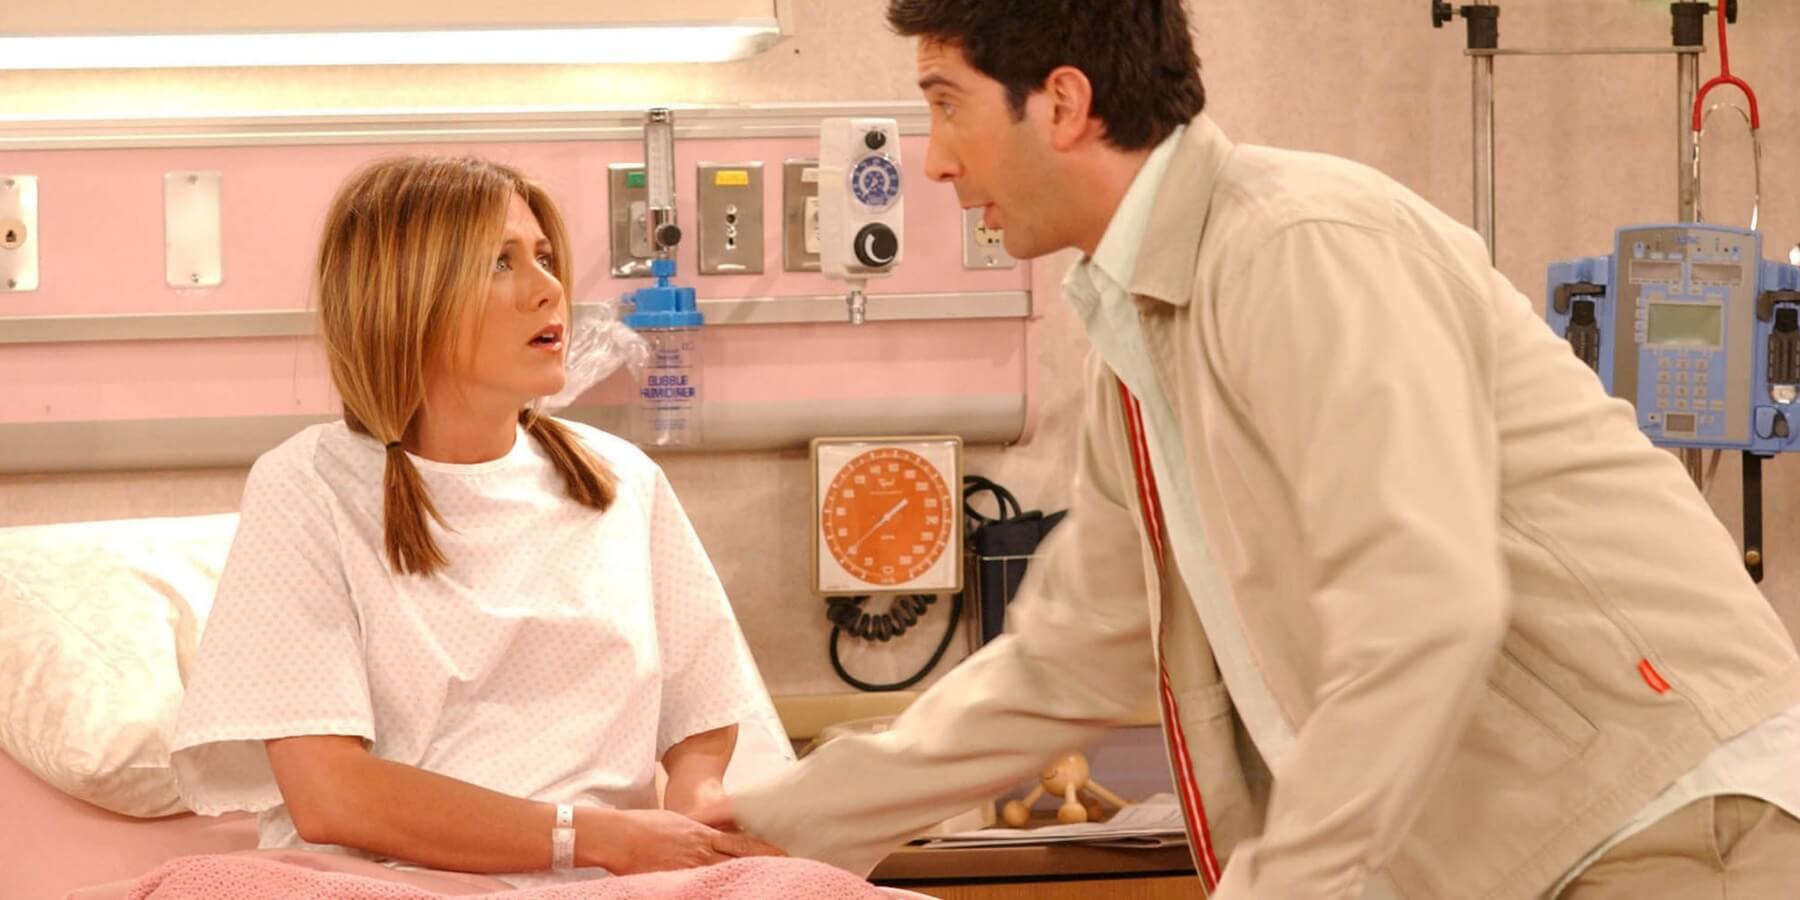 Jennifer Aniston and David Schwimmer worked together for 10 years on 'Friends'